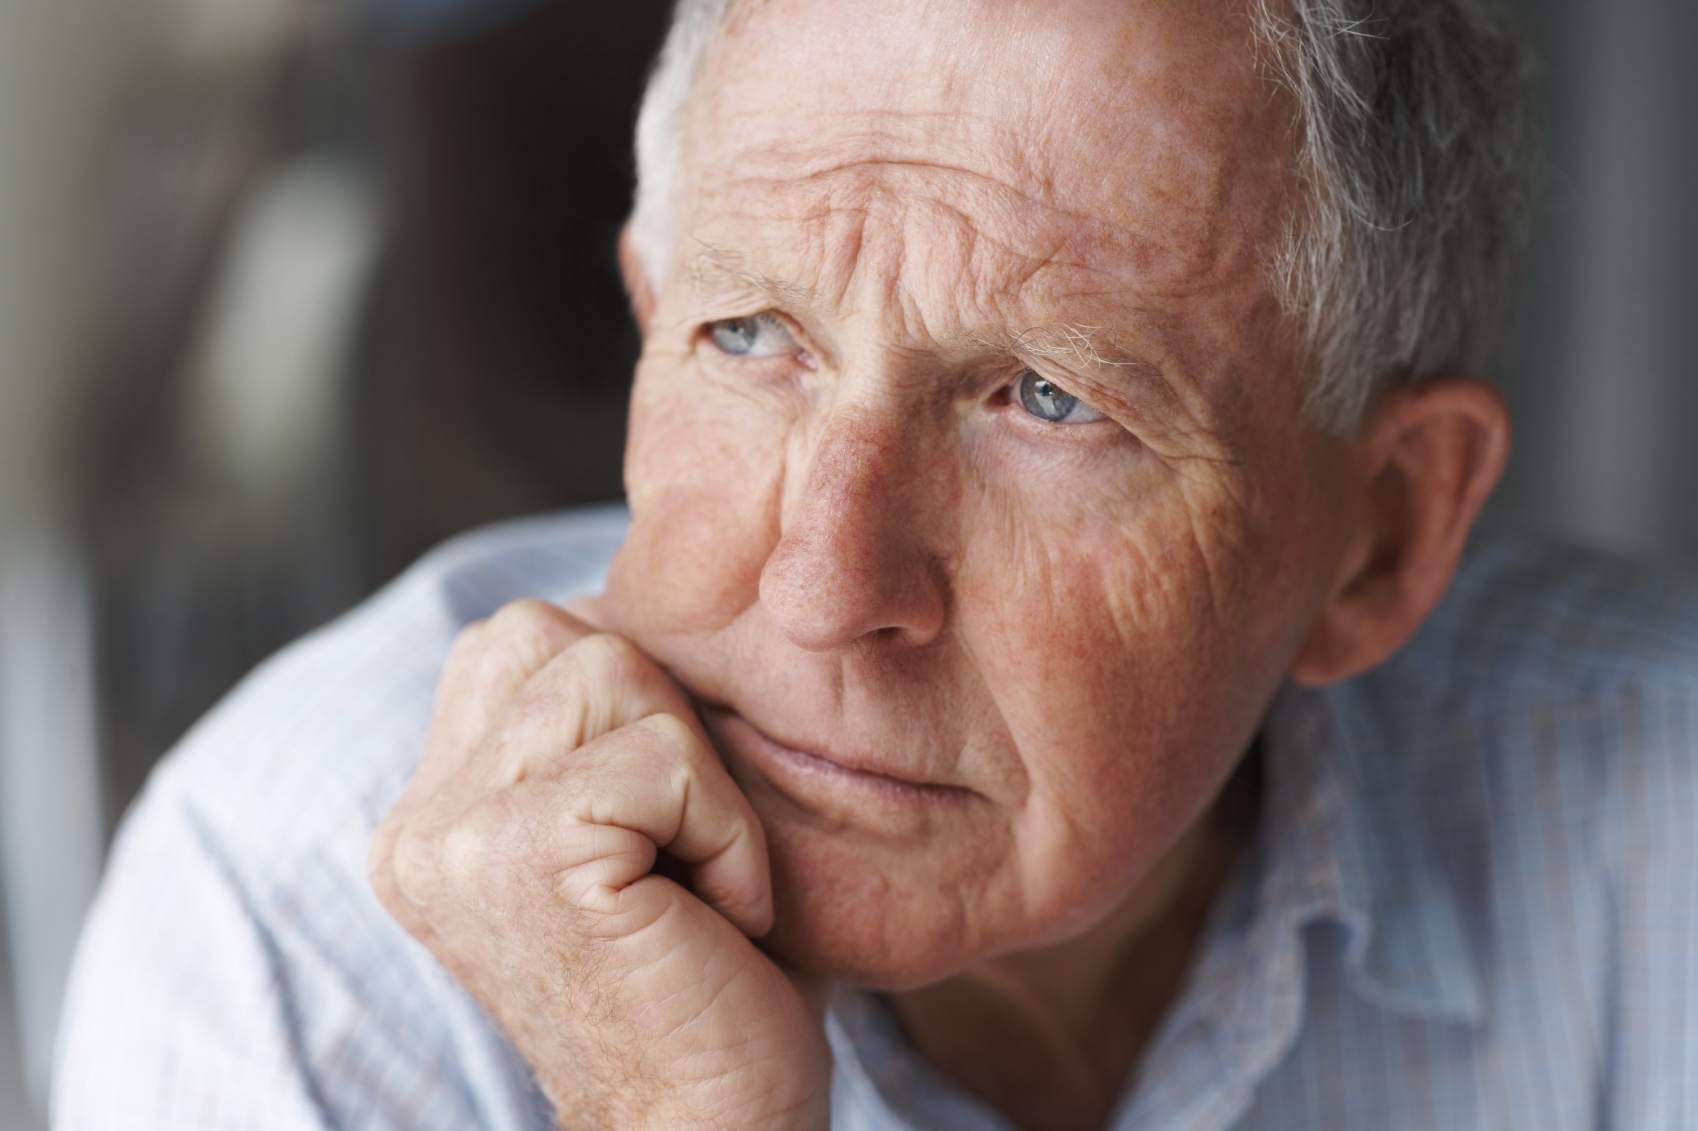 Elderly man in deep thought